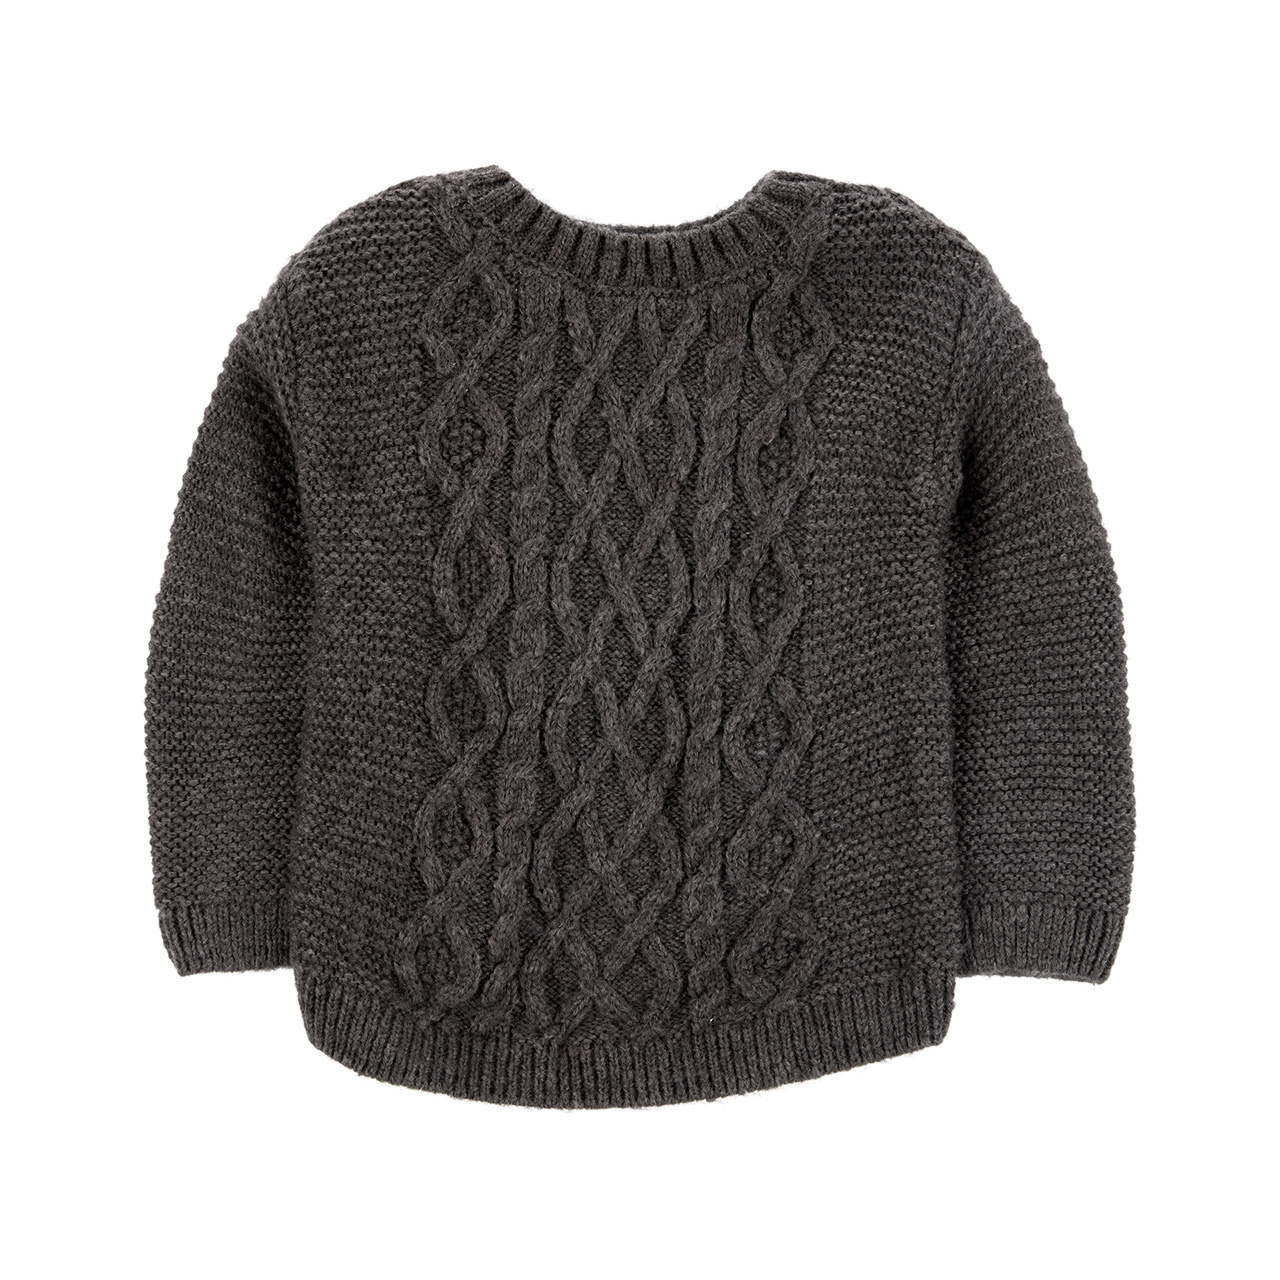 A dark grey sweater for babies.